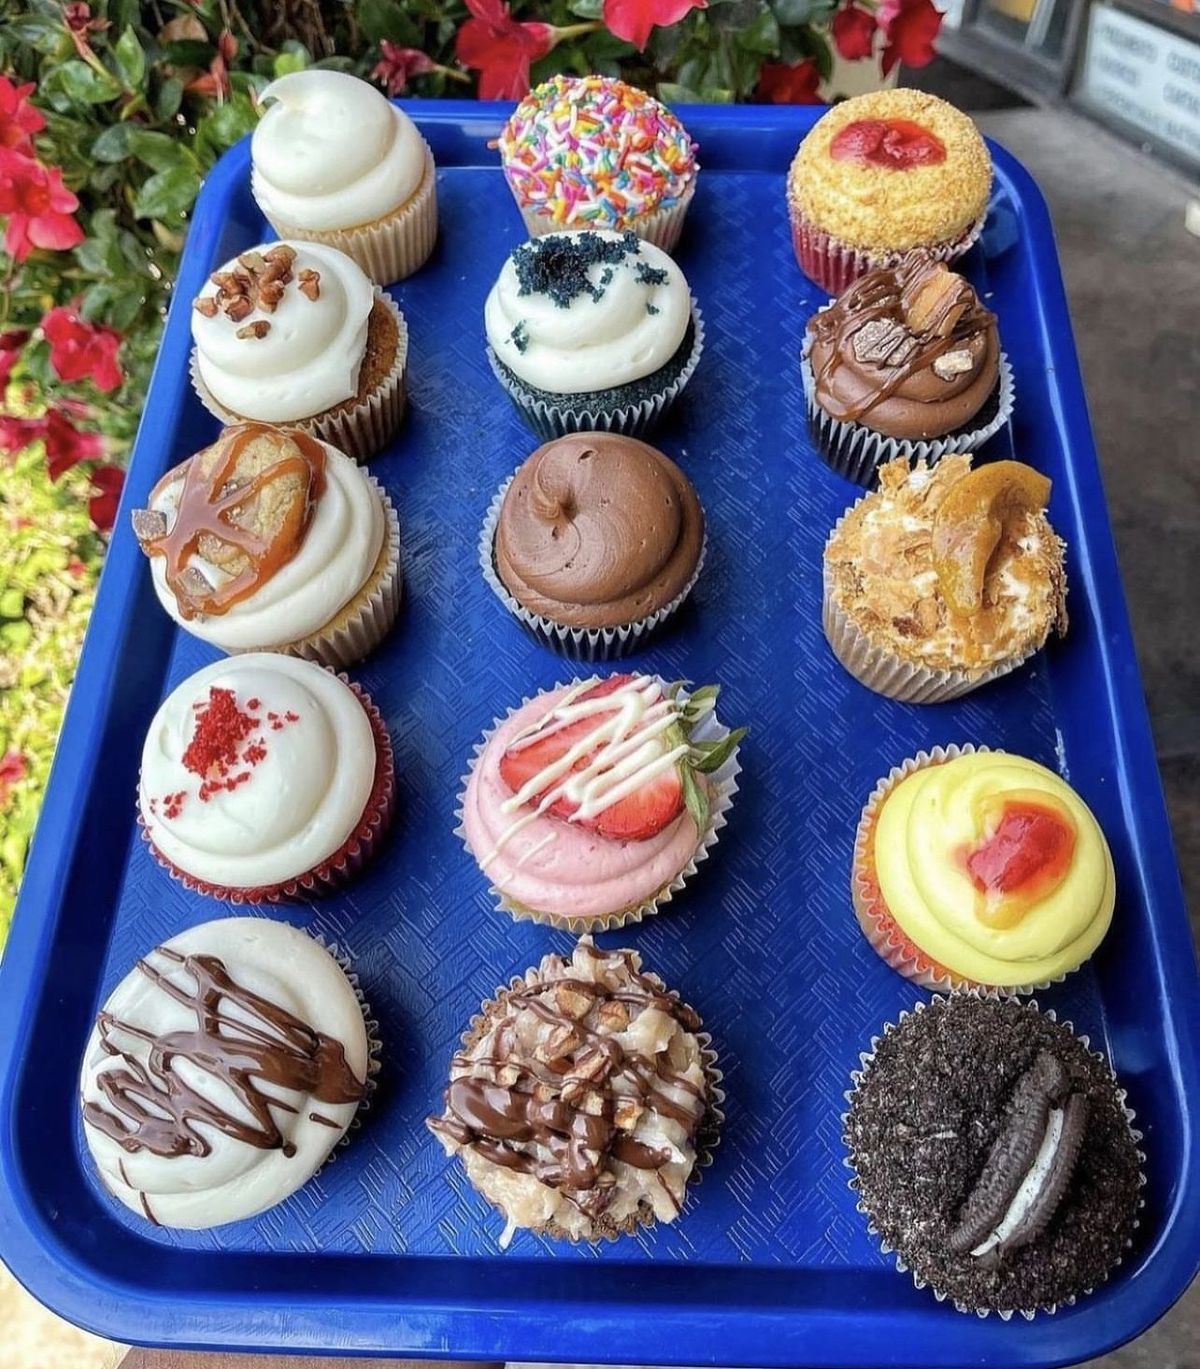 Tray of cupcakes at Sweet Red Peach bakery in Inglewood.